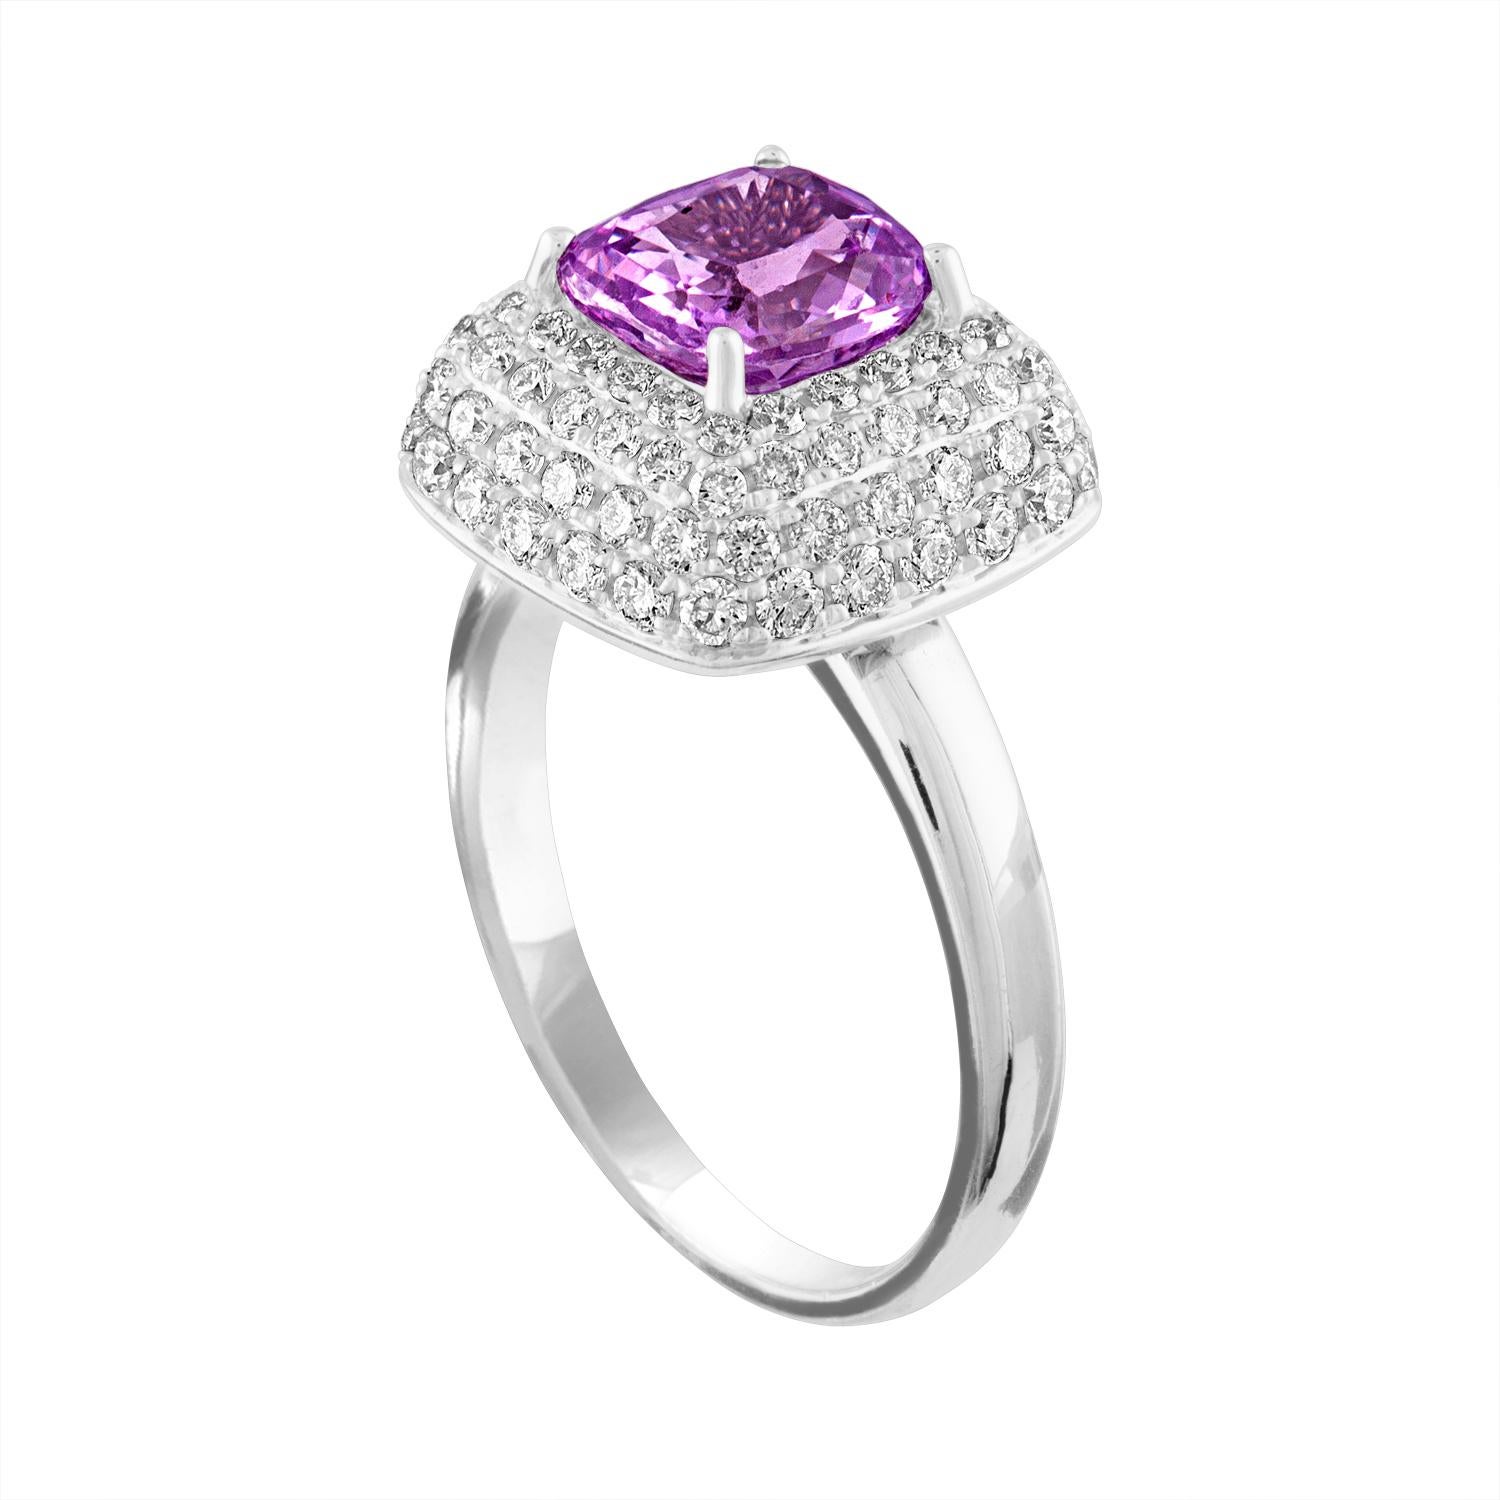 Beautiful Pave Sapphire Ring
The ring is 18K White Gold
The Sapphire is a Purple Pink Cushion 1.92 Carat
The Sapphire is GIA Certified NO HEAT
There are 1.20 Carats in Diamonds F/G VS/SI
The ring is a size 6.50, sizable
The ring weighs 4.7 grams